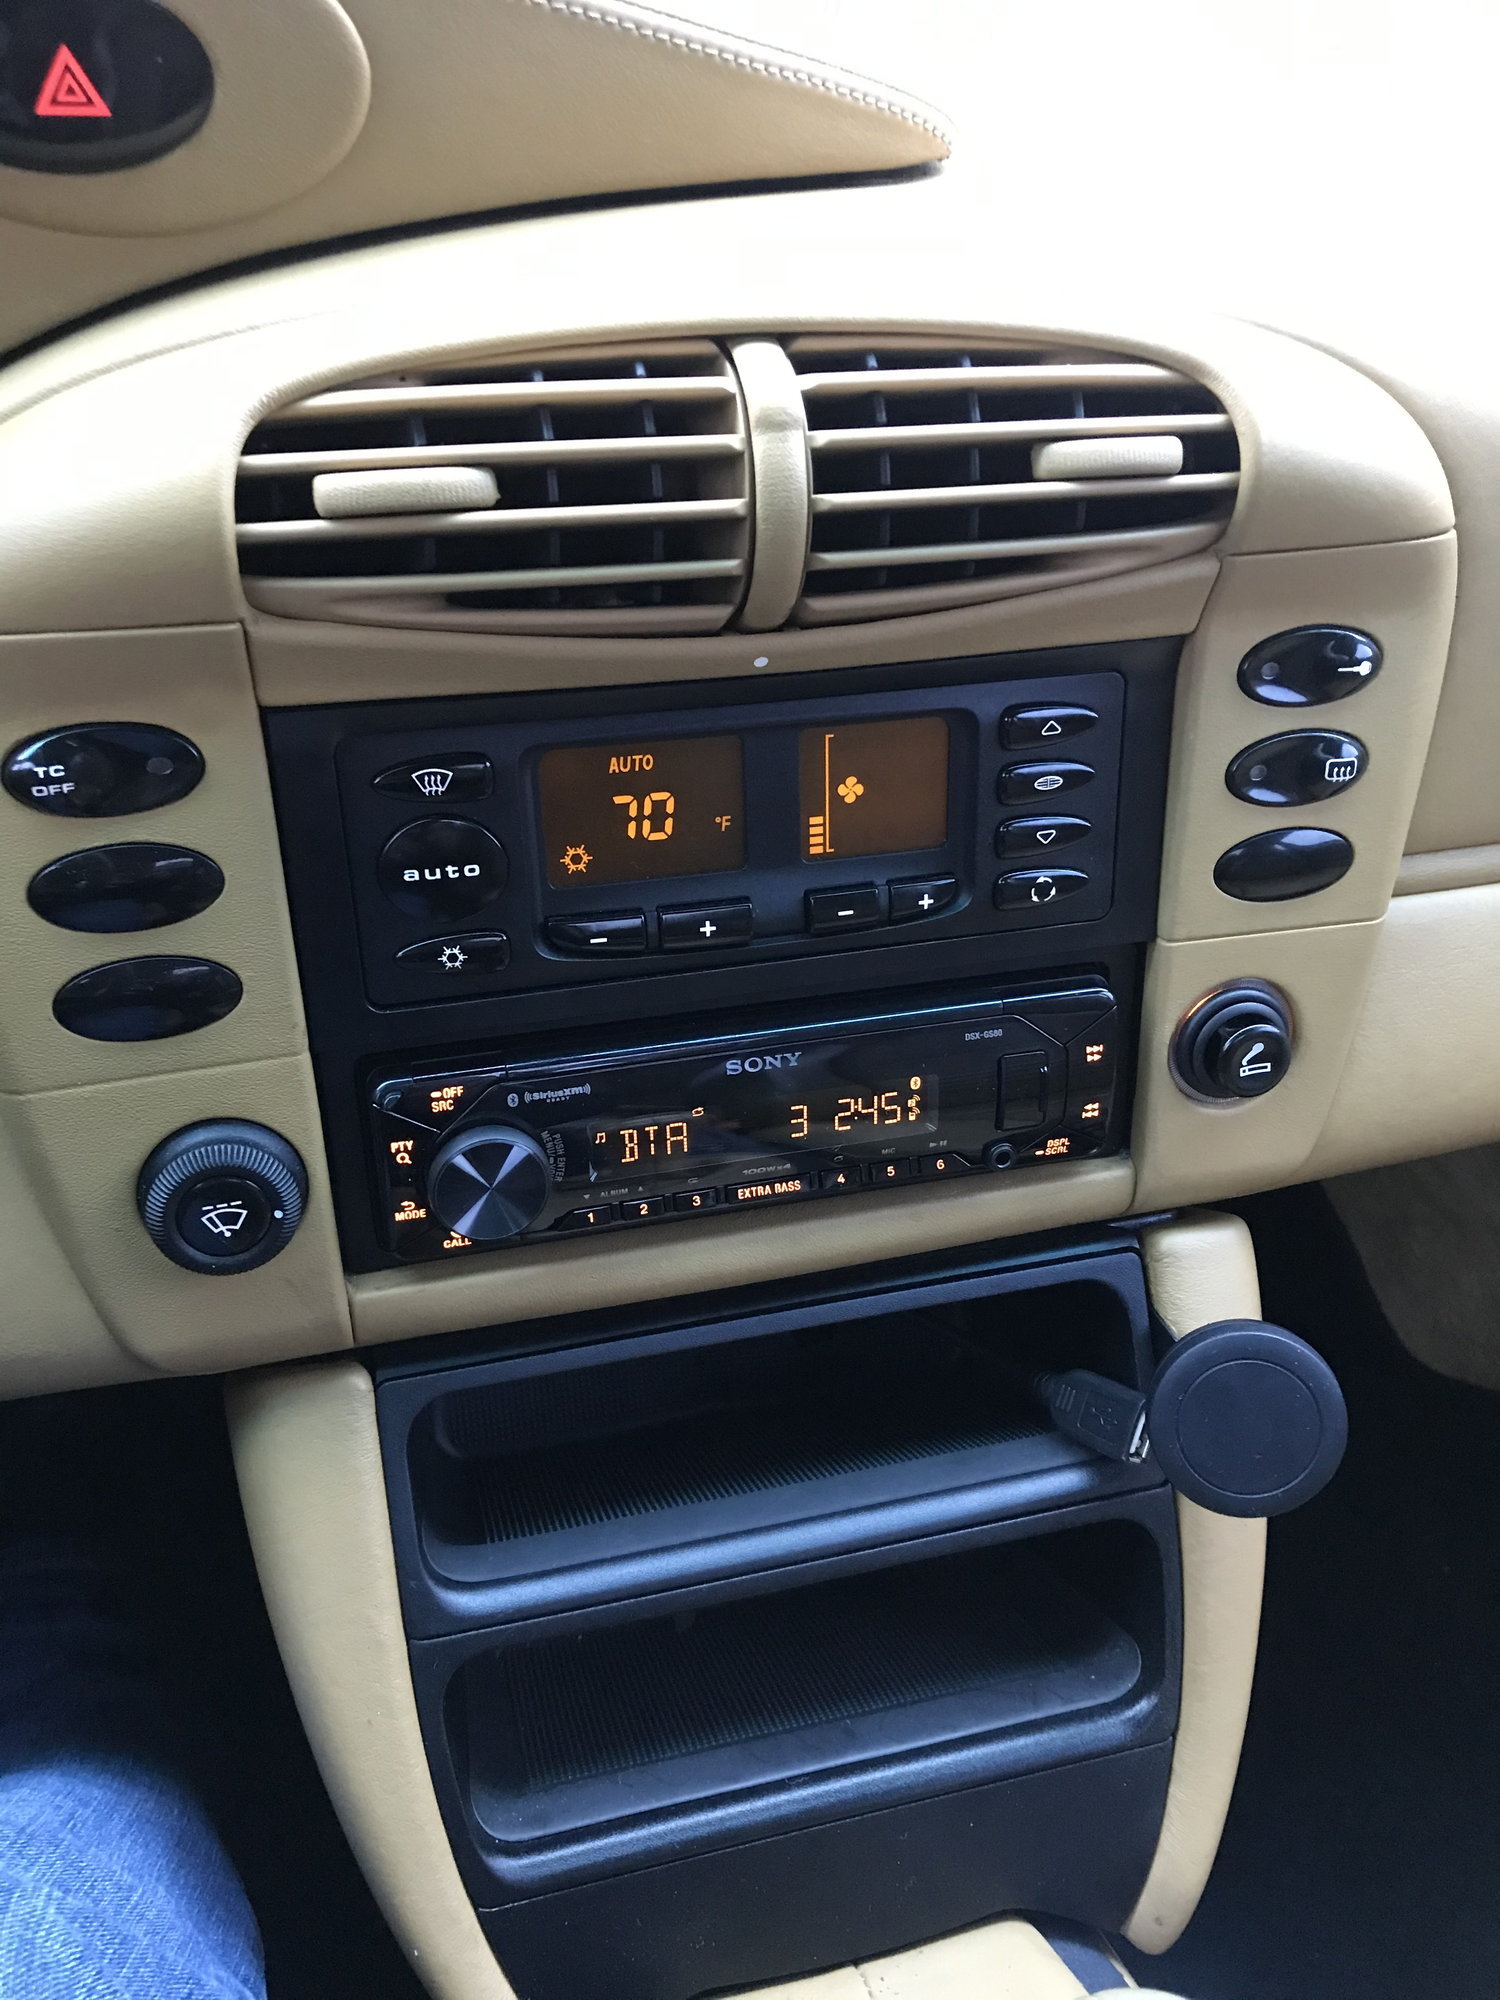 Why are aftermarket stereos stuck in the 90's? - Page 2 - Rennlist